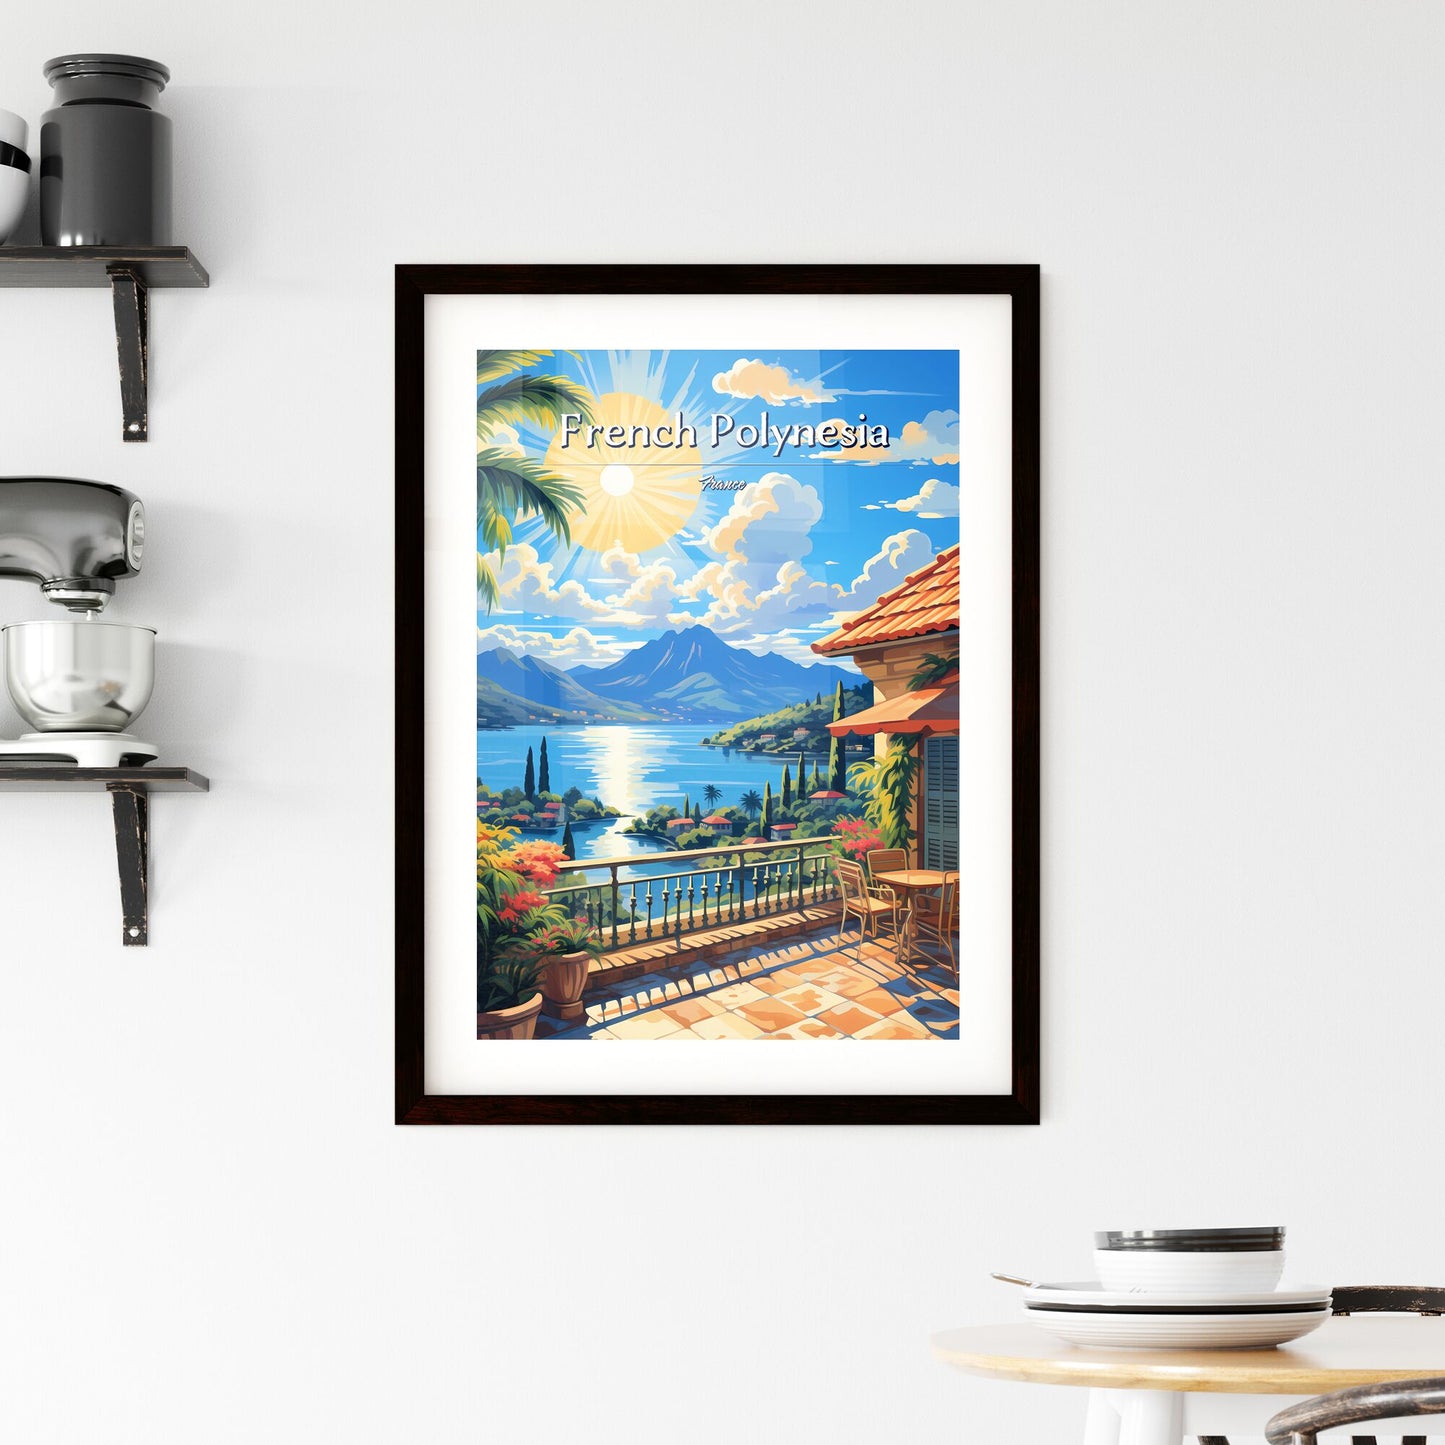 On the roofs of French Polynesia, France - Art print of a painting of a house overlooking a body of water and mountains Default Title